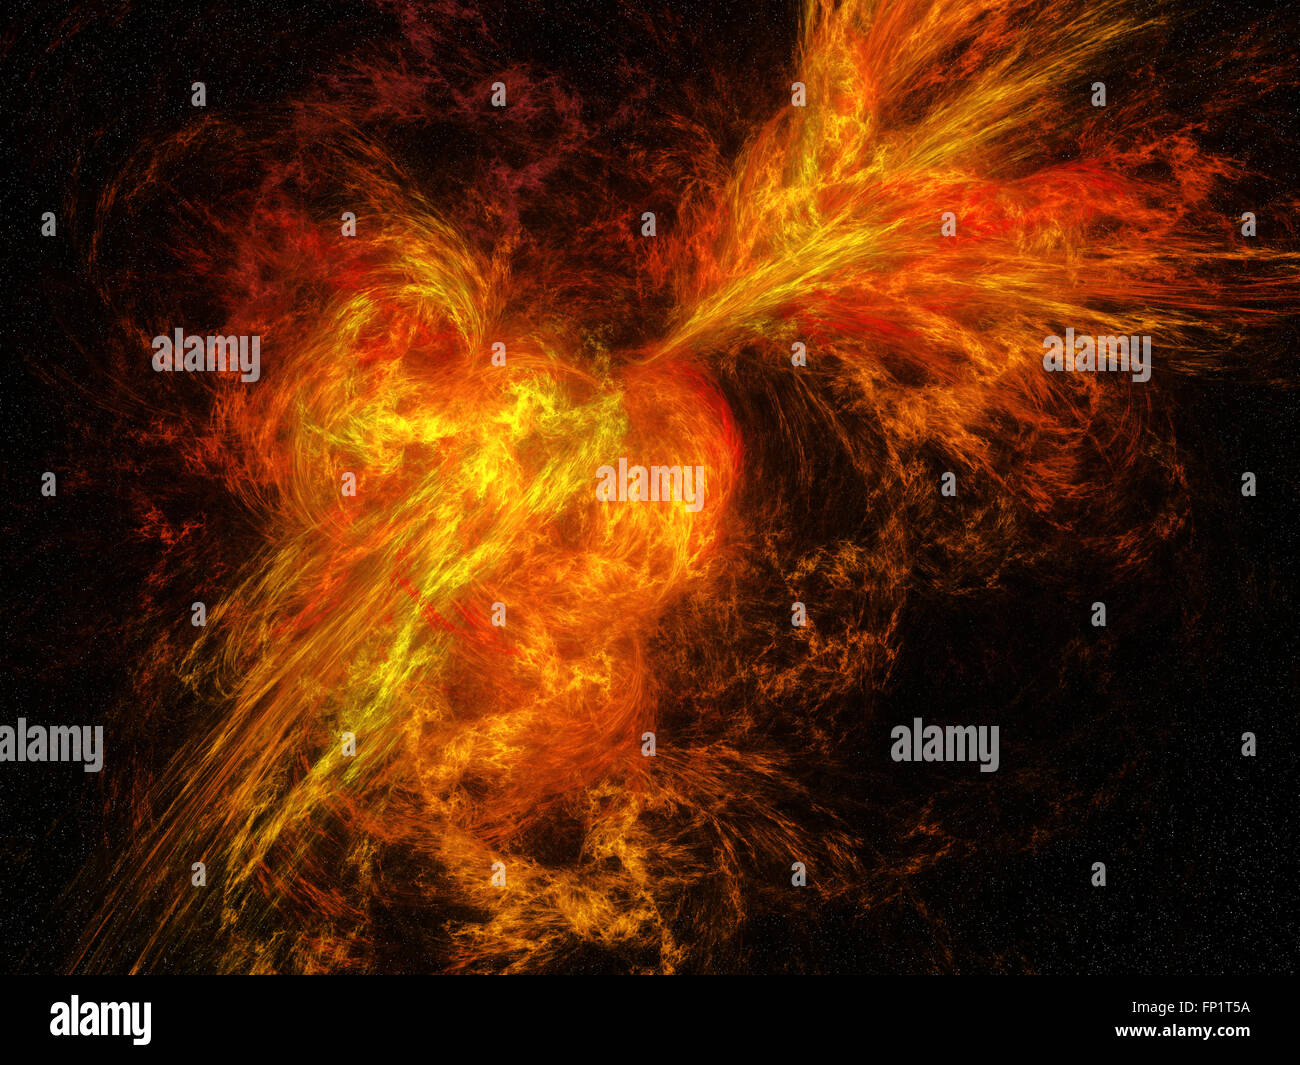 Abstract flames explosion illustration in deepspace. Stock Photo